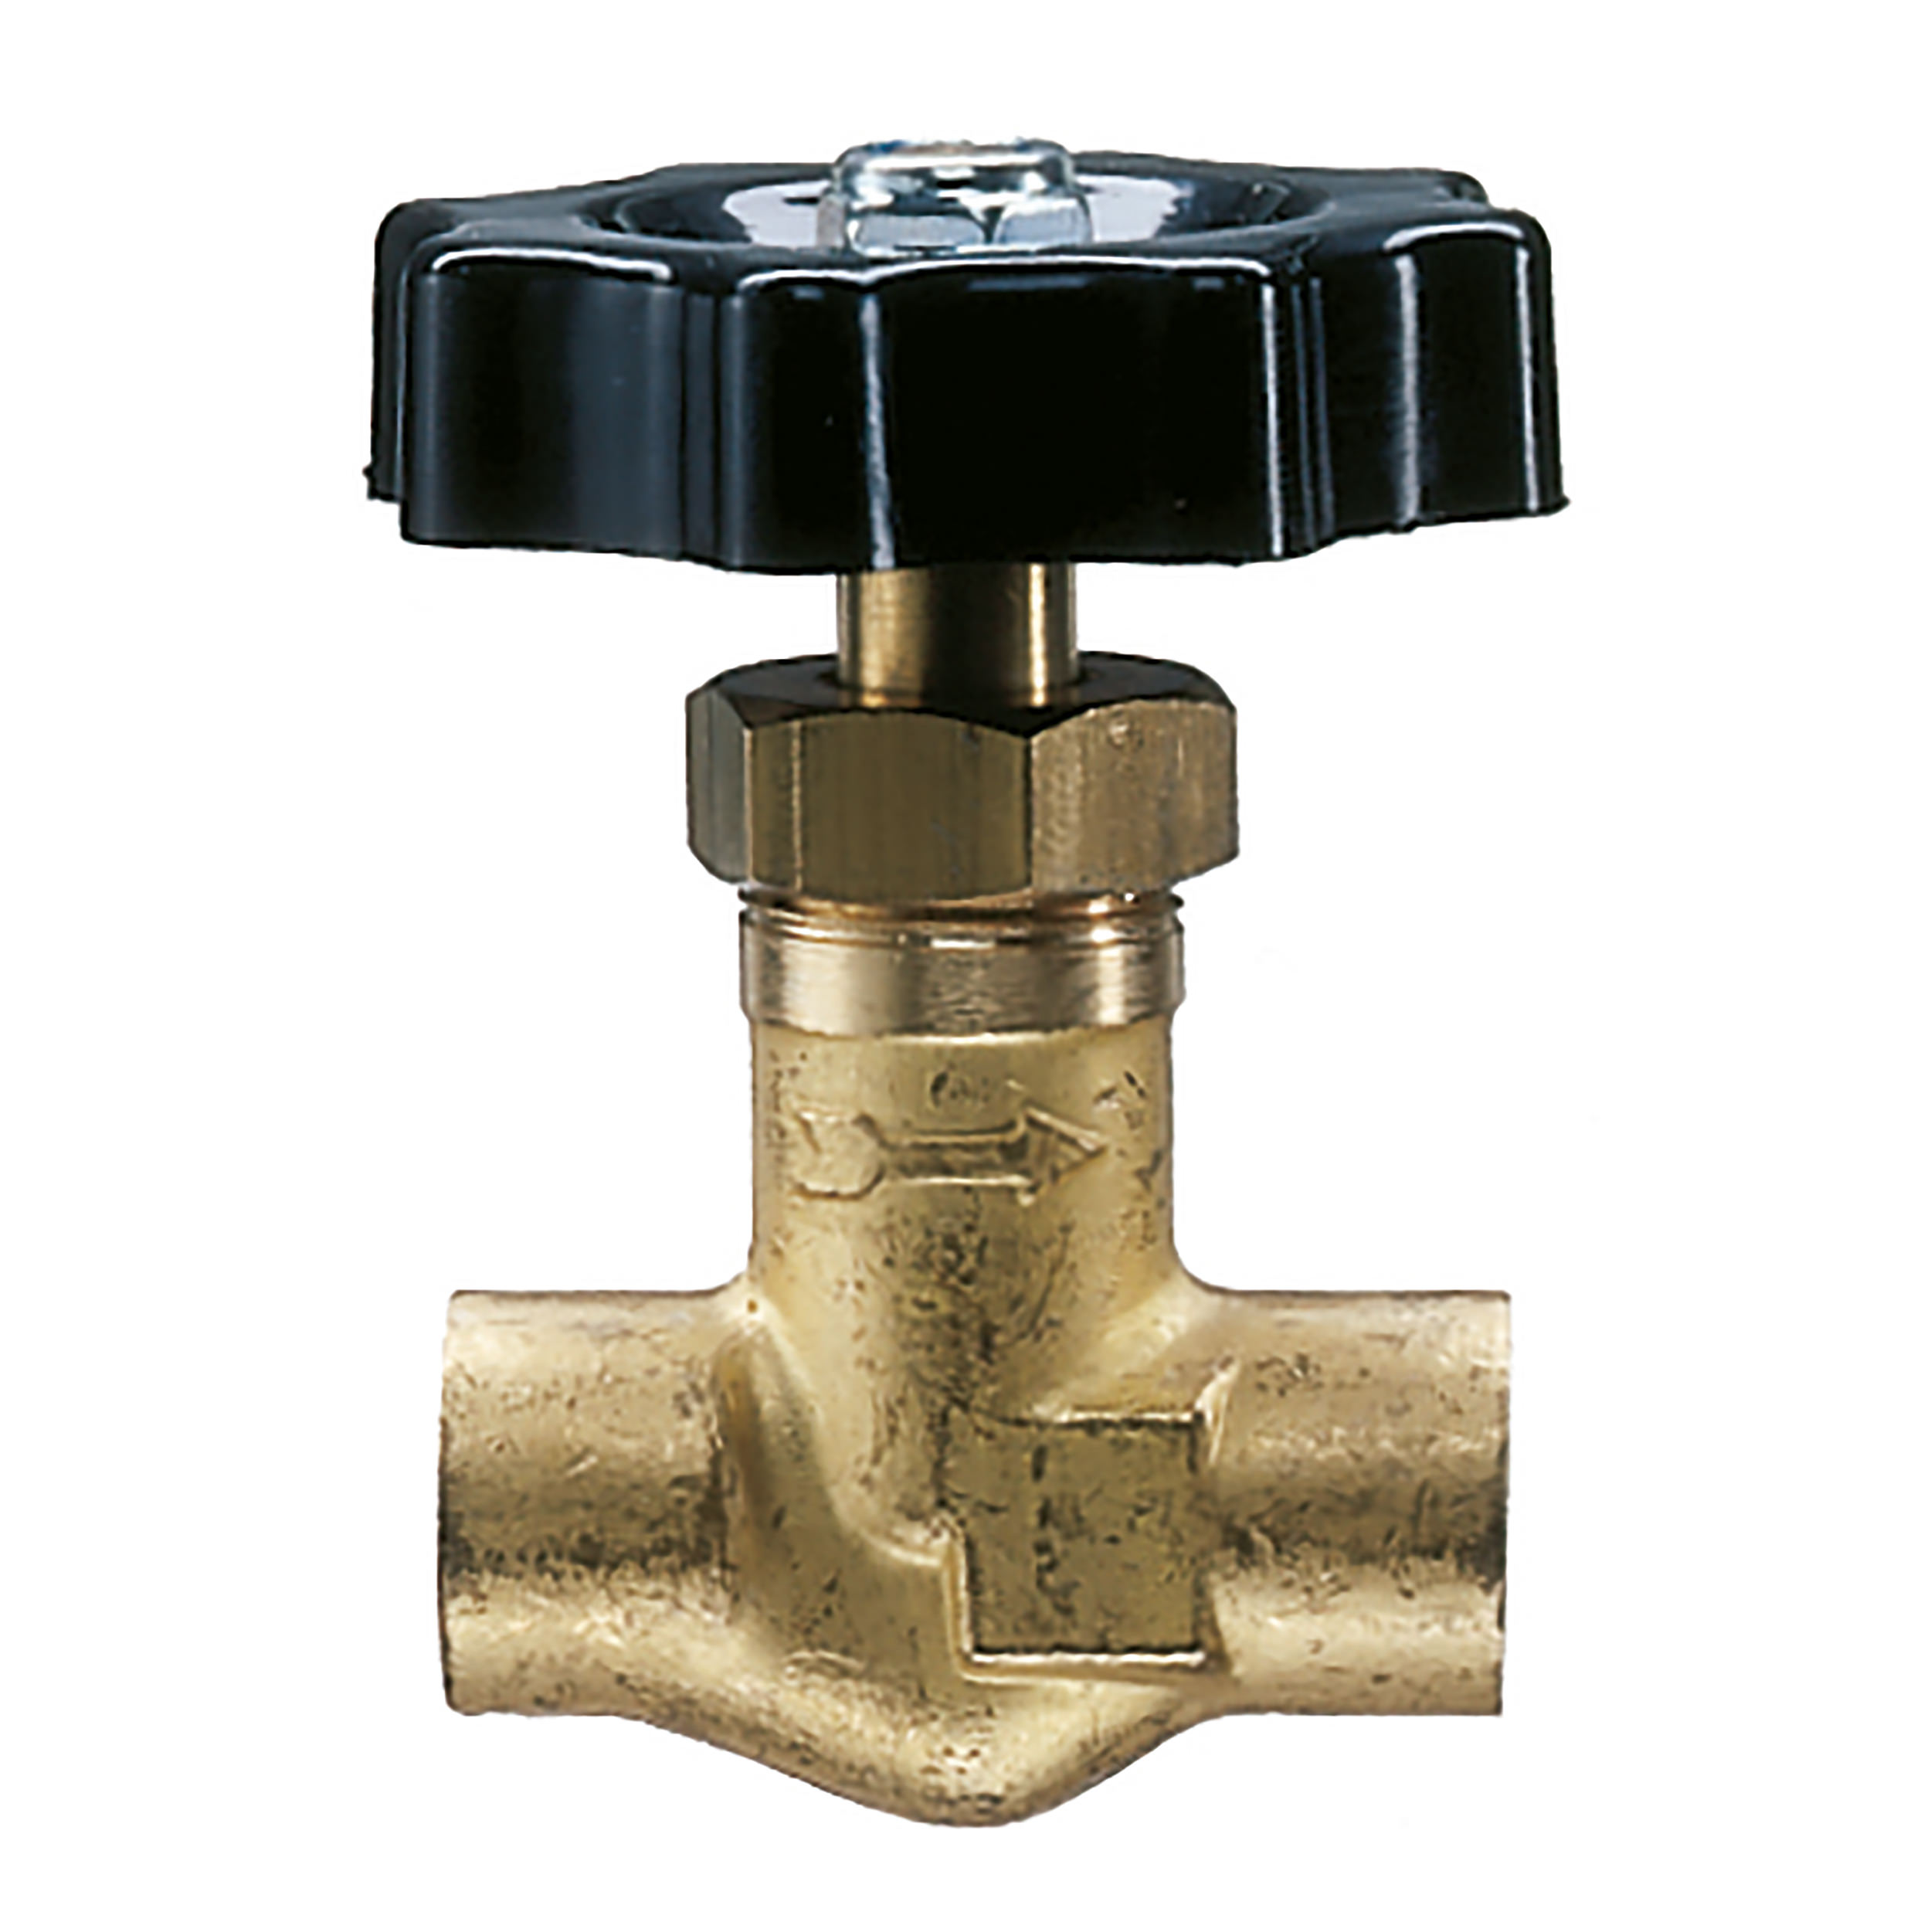 Shut-off valve, 2-way valve, manually operated, straight way type, max. operating pressure 580 psi, G¼ f, DN 6, length: 43 mm